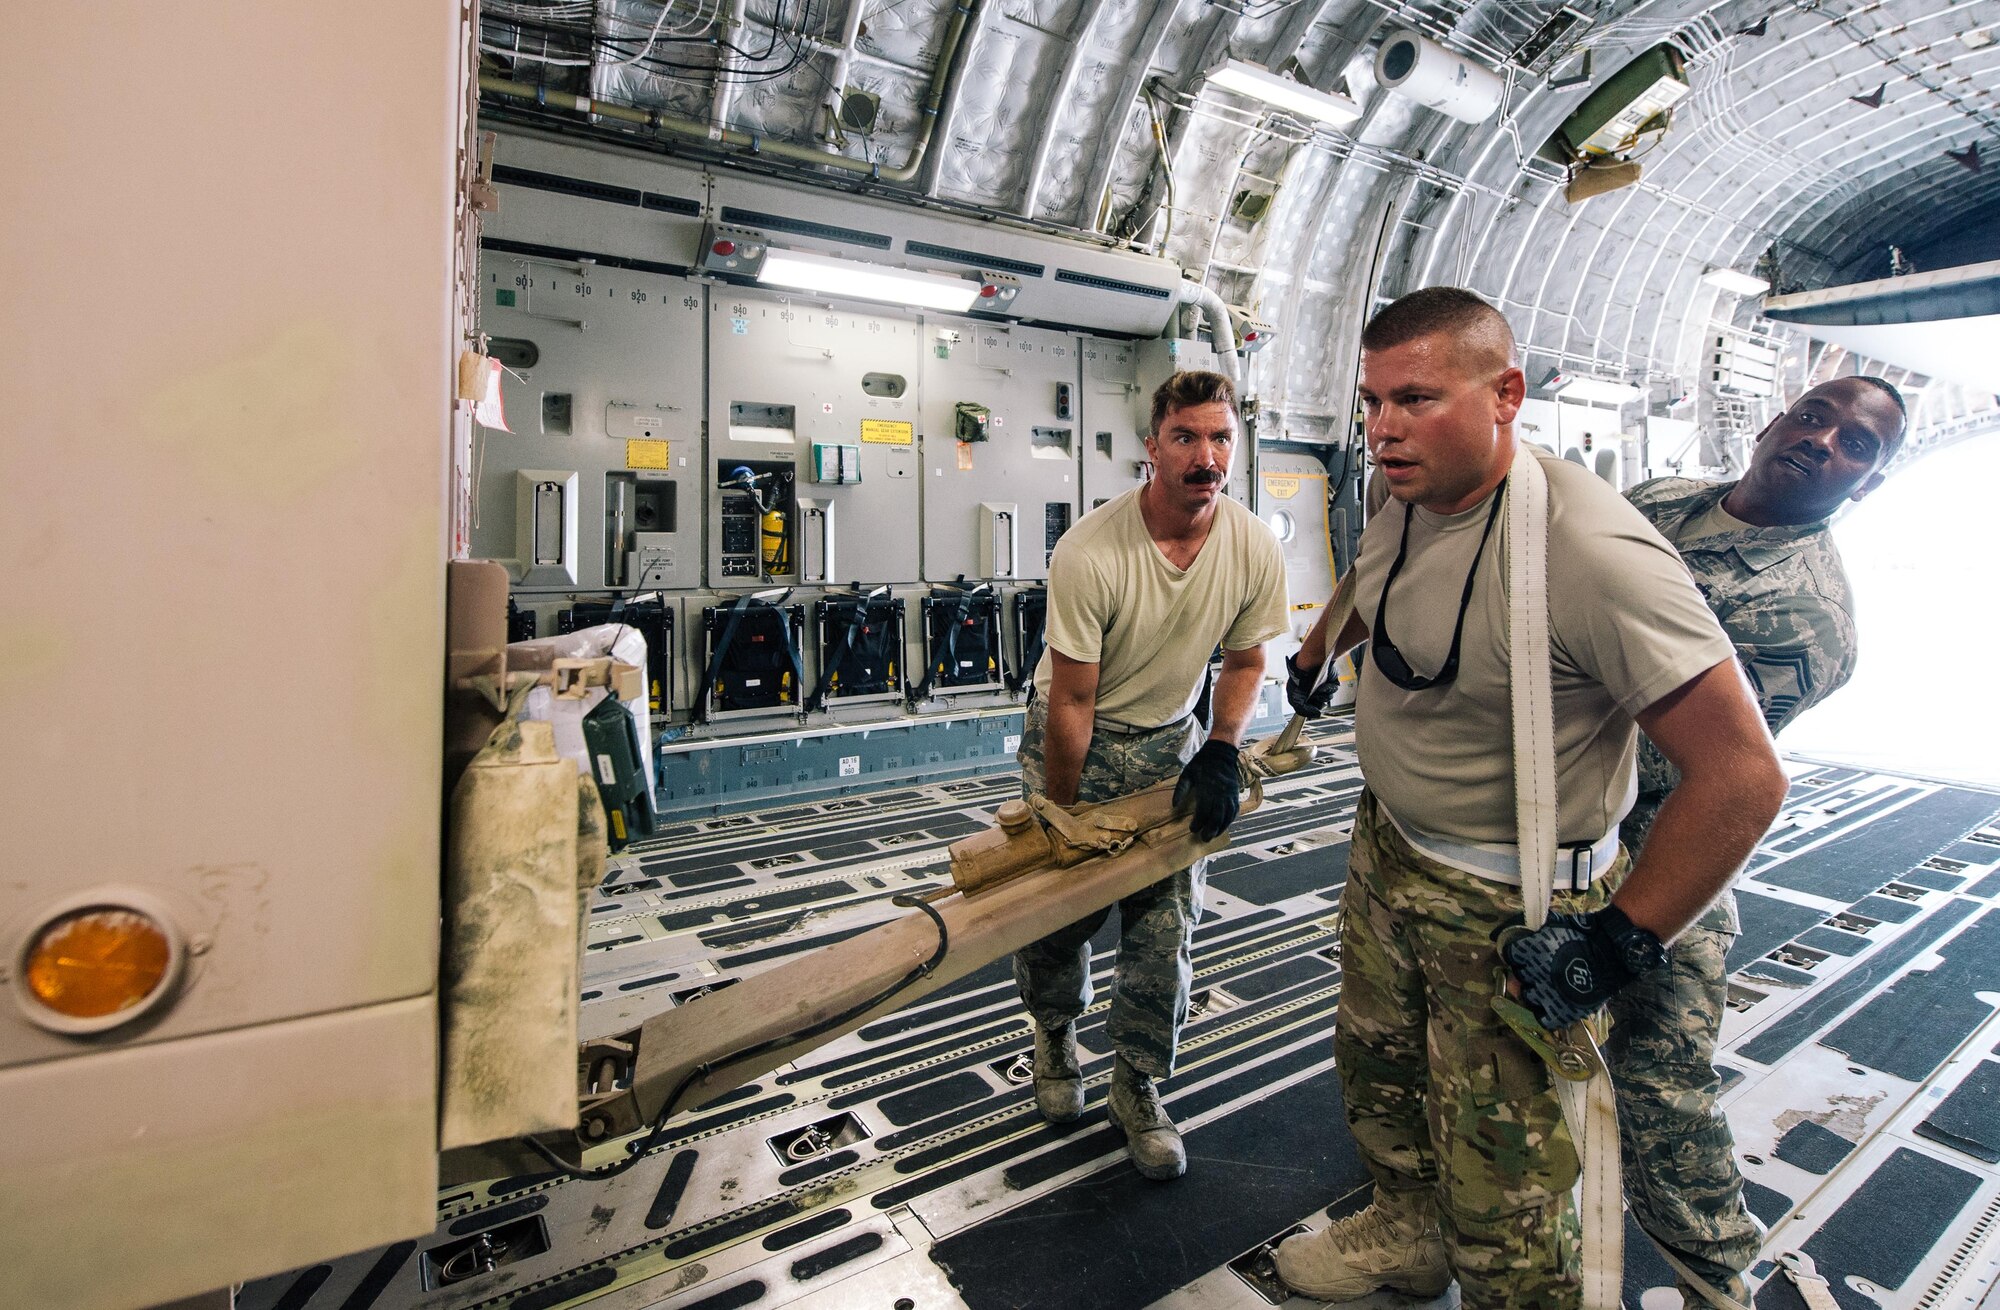 Airmen with the 332nd Expeditionary Logistics Readiness Squadron help load a generator into an 816th Expeditionary Airlift Squadron C-17 Globemaster III in support of Combined Joint Task Force - Operation Inherent Resolve, Oct. 28, 2016. These squadrons are actively engaged in tactical airlift operations supporting the Mosul offensive. (U.S. Air Force photo by Senior Airman Jordan Castelan)